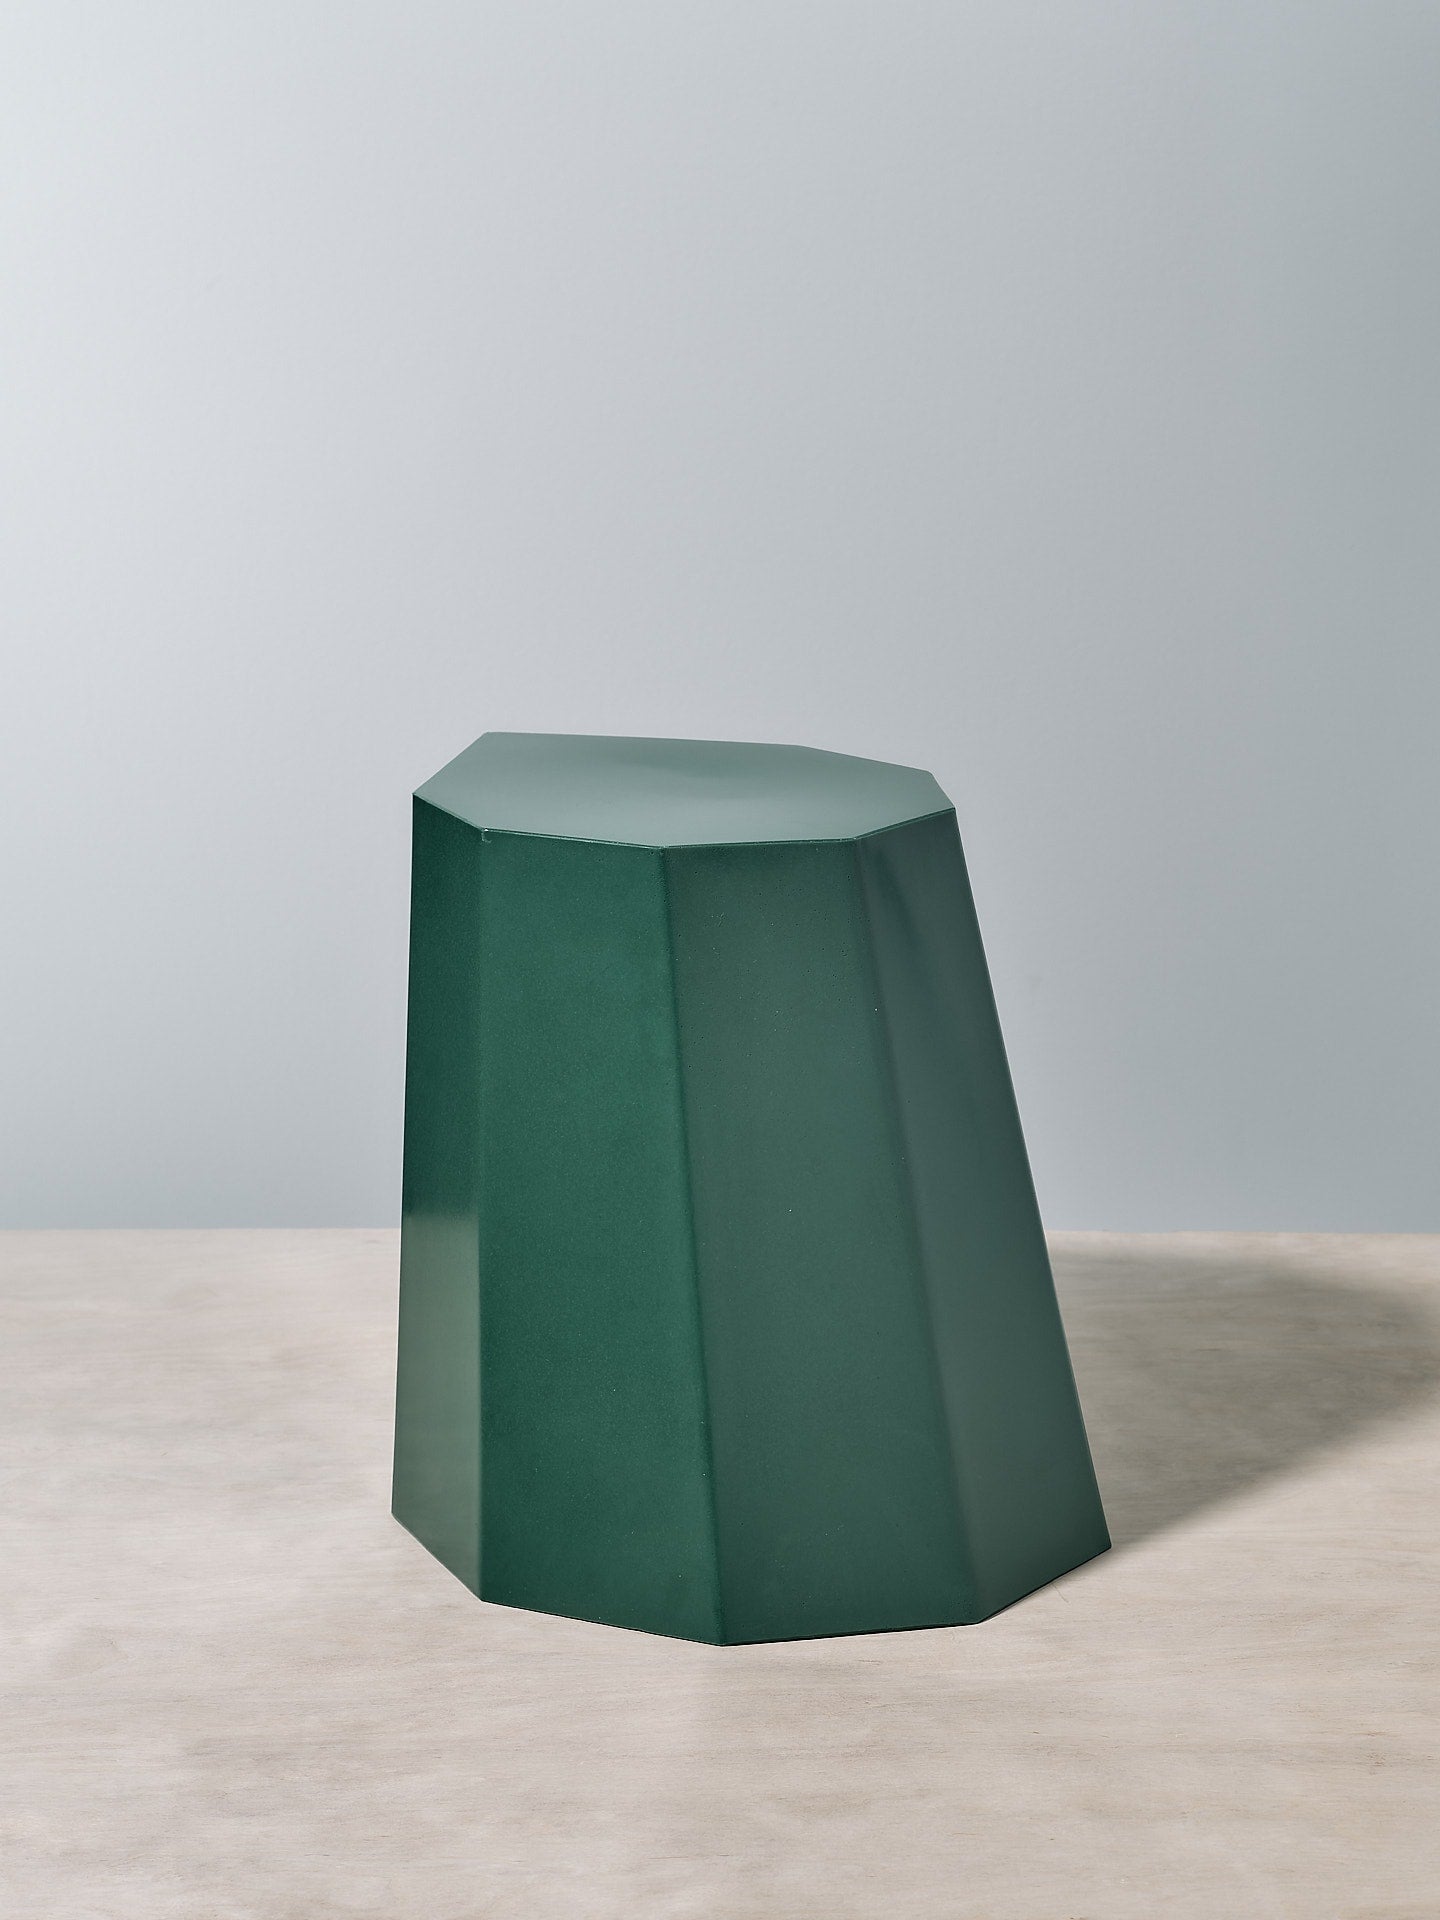 A Martino Gamper Arnoldino Stool – Forest sitting on top of a table.